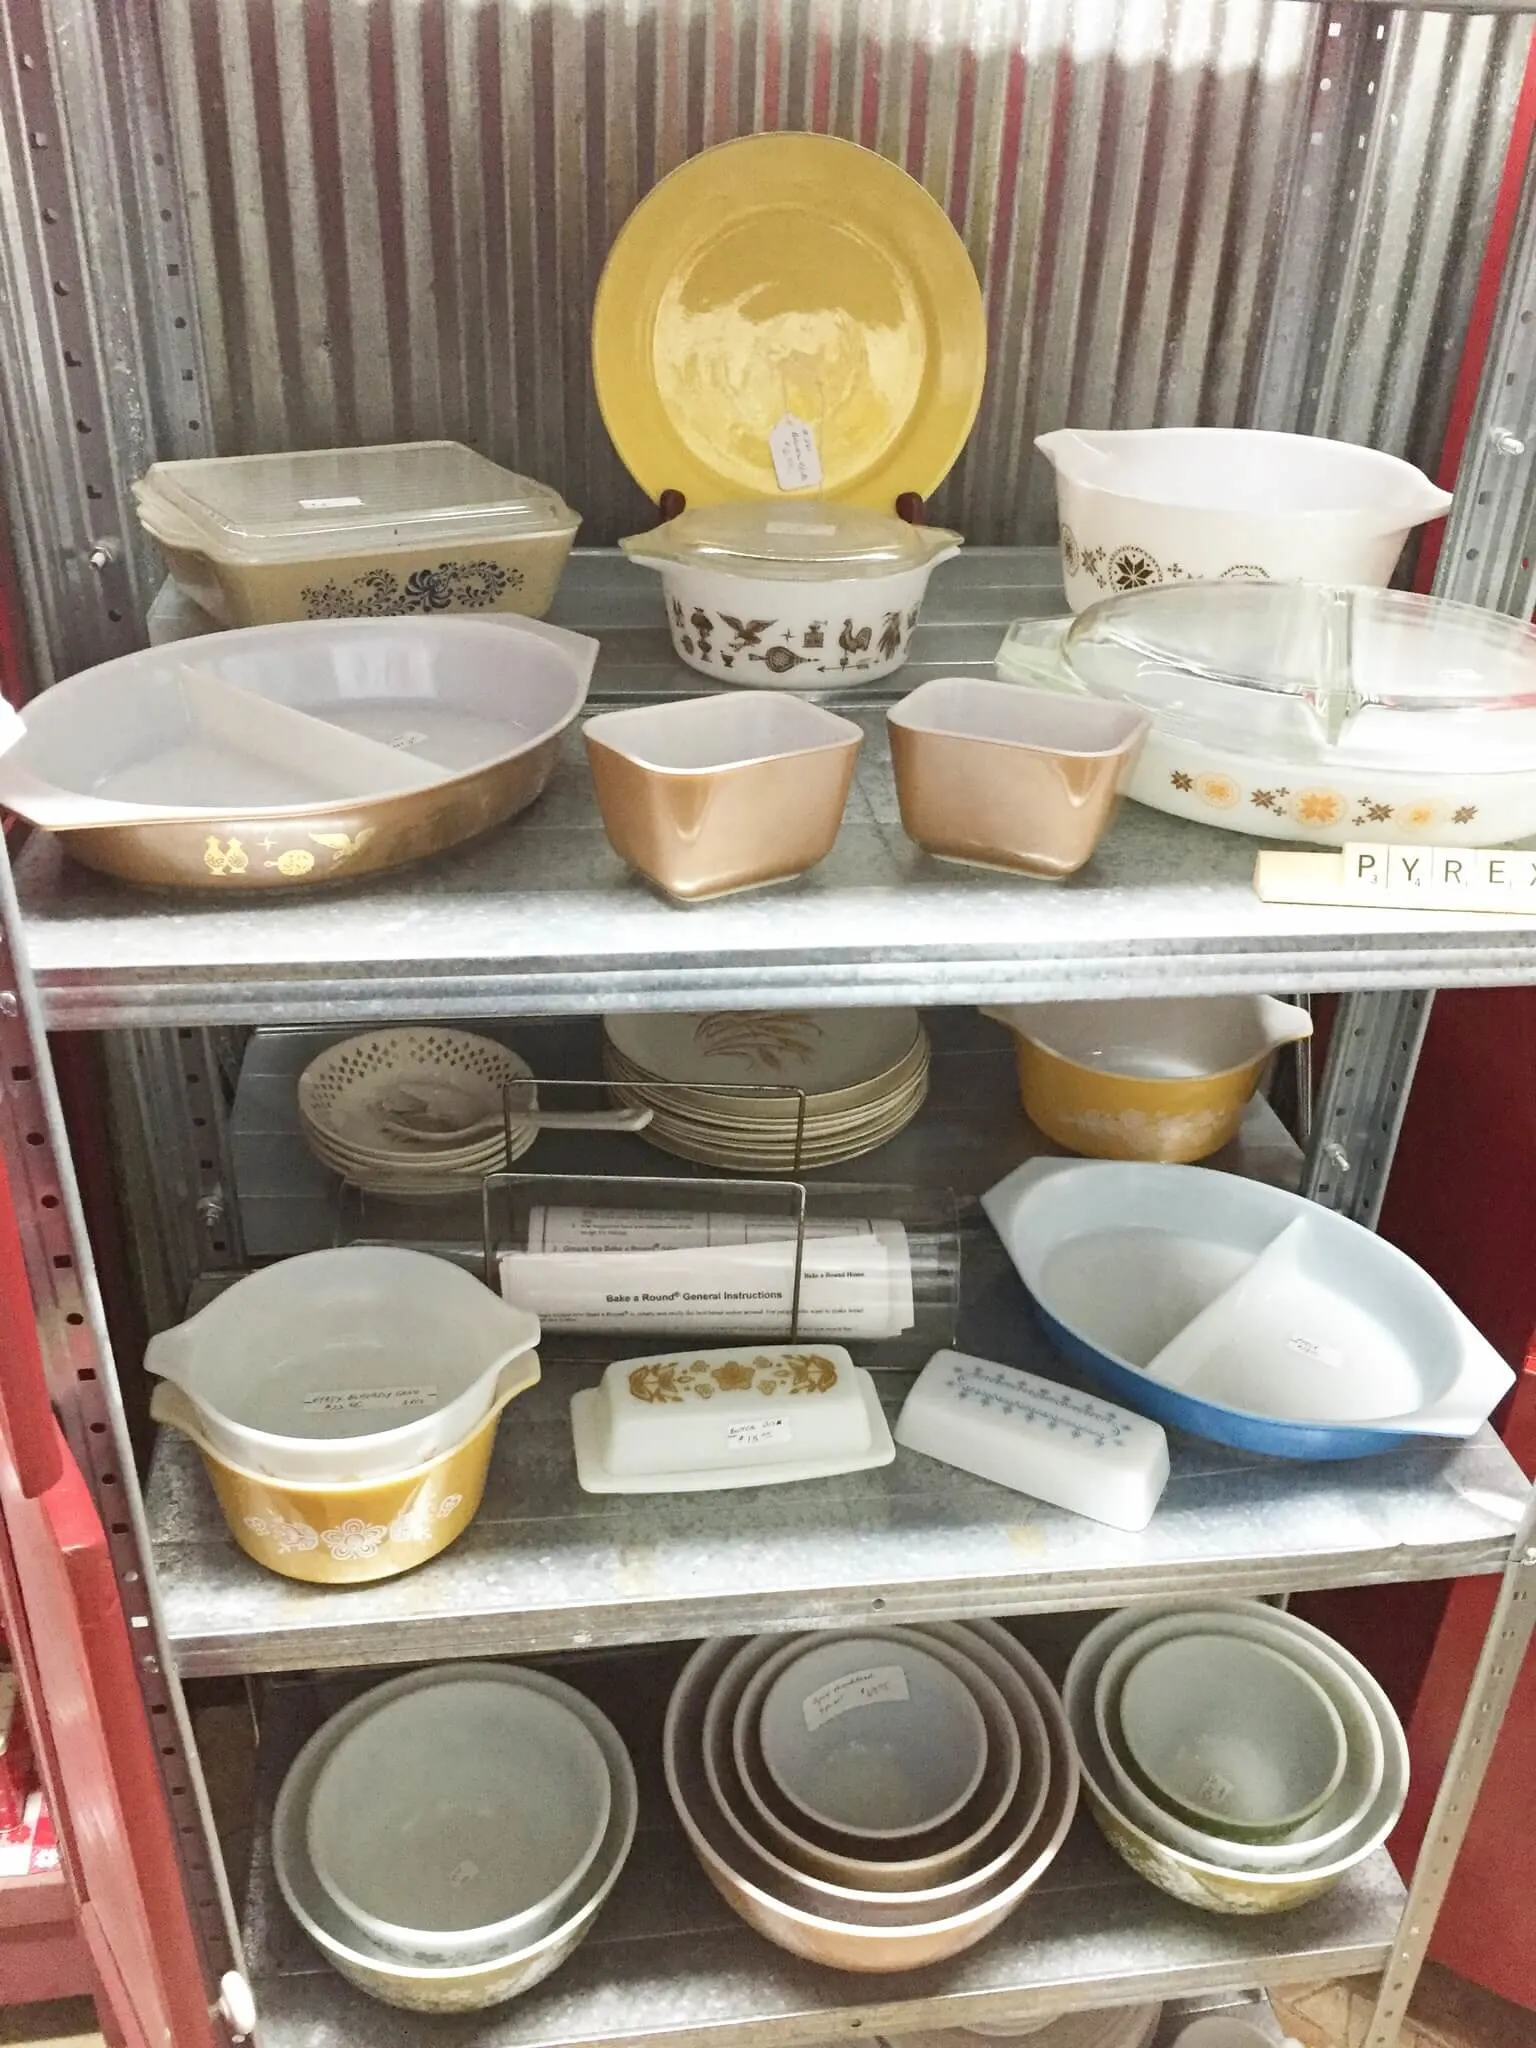 Finding pyrex while antiquing